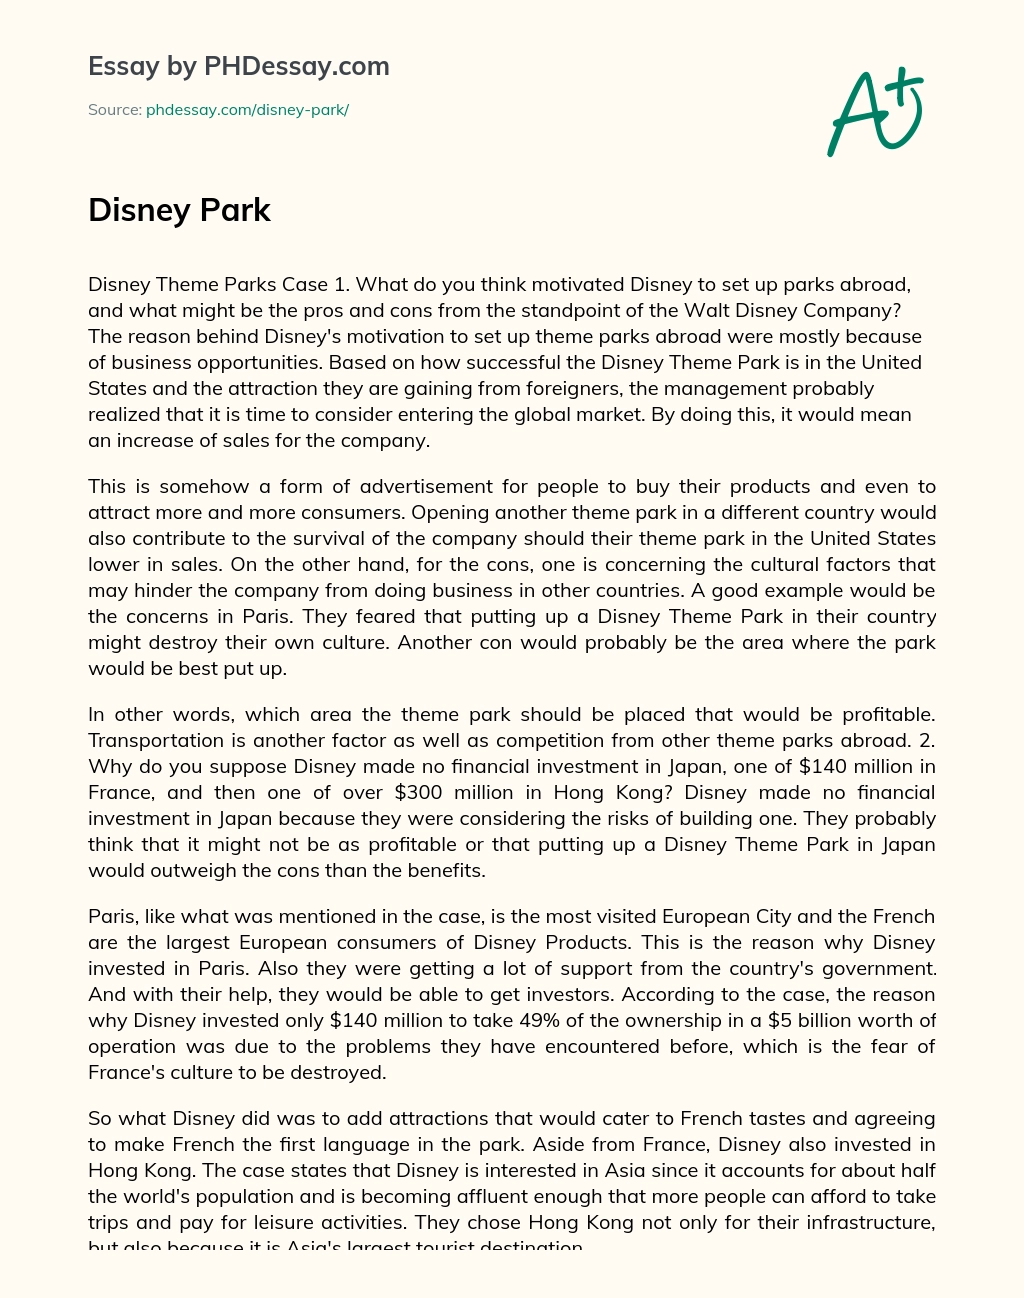 Pros and Cons of Disney Setting Up Theme Parks Abroad essay